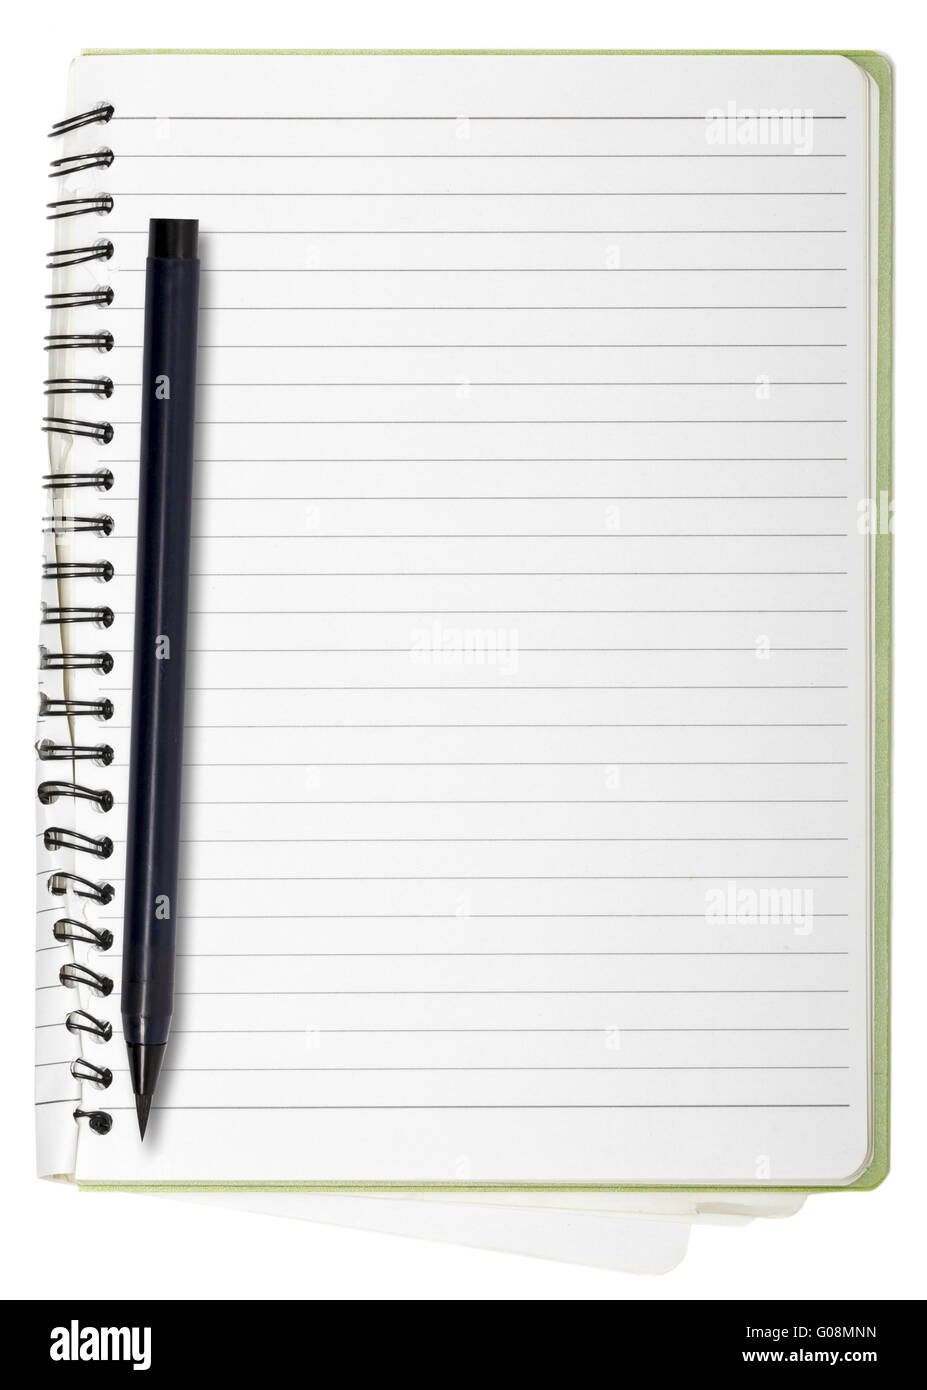 used blank note book with ring binder and japanese brush pen, isolated on white Stock Photo